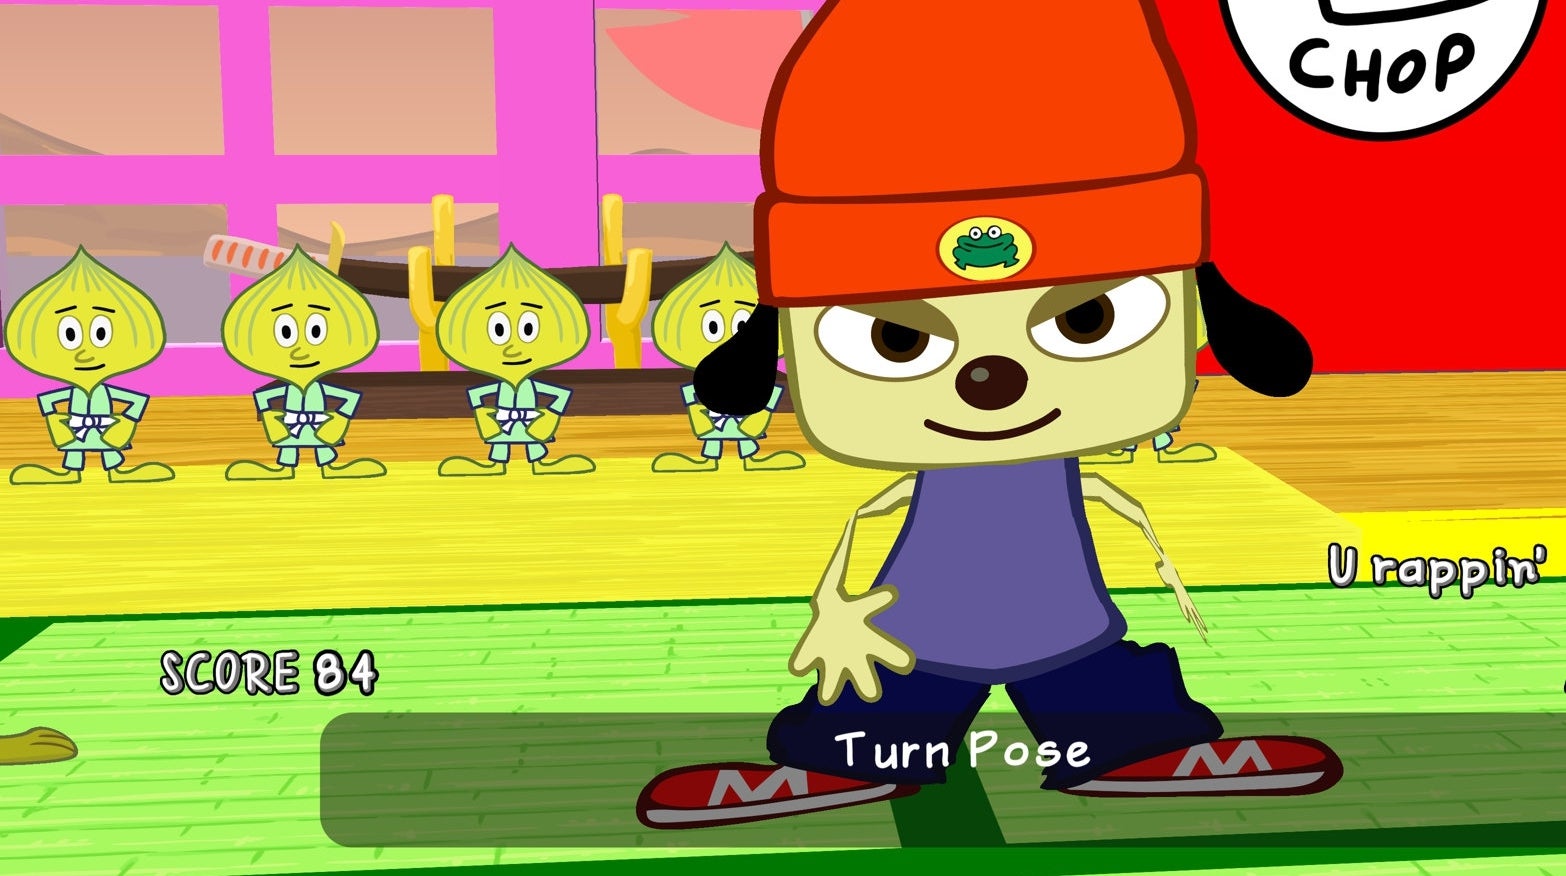 Image for It looks like PS4 Parappa Remastered is the PSP game running under emulation